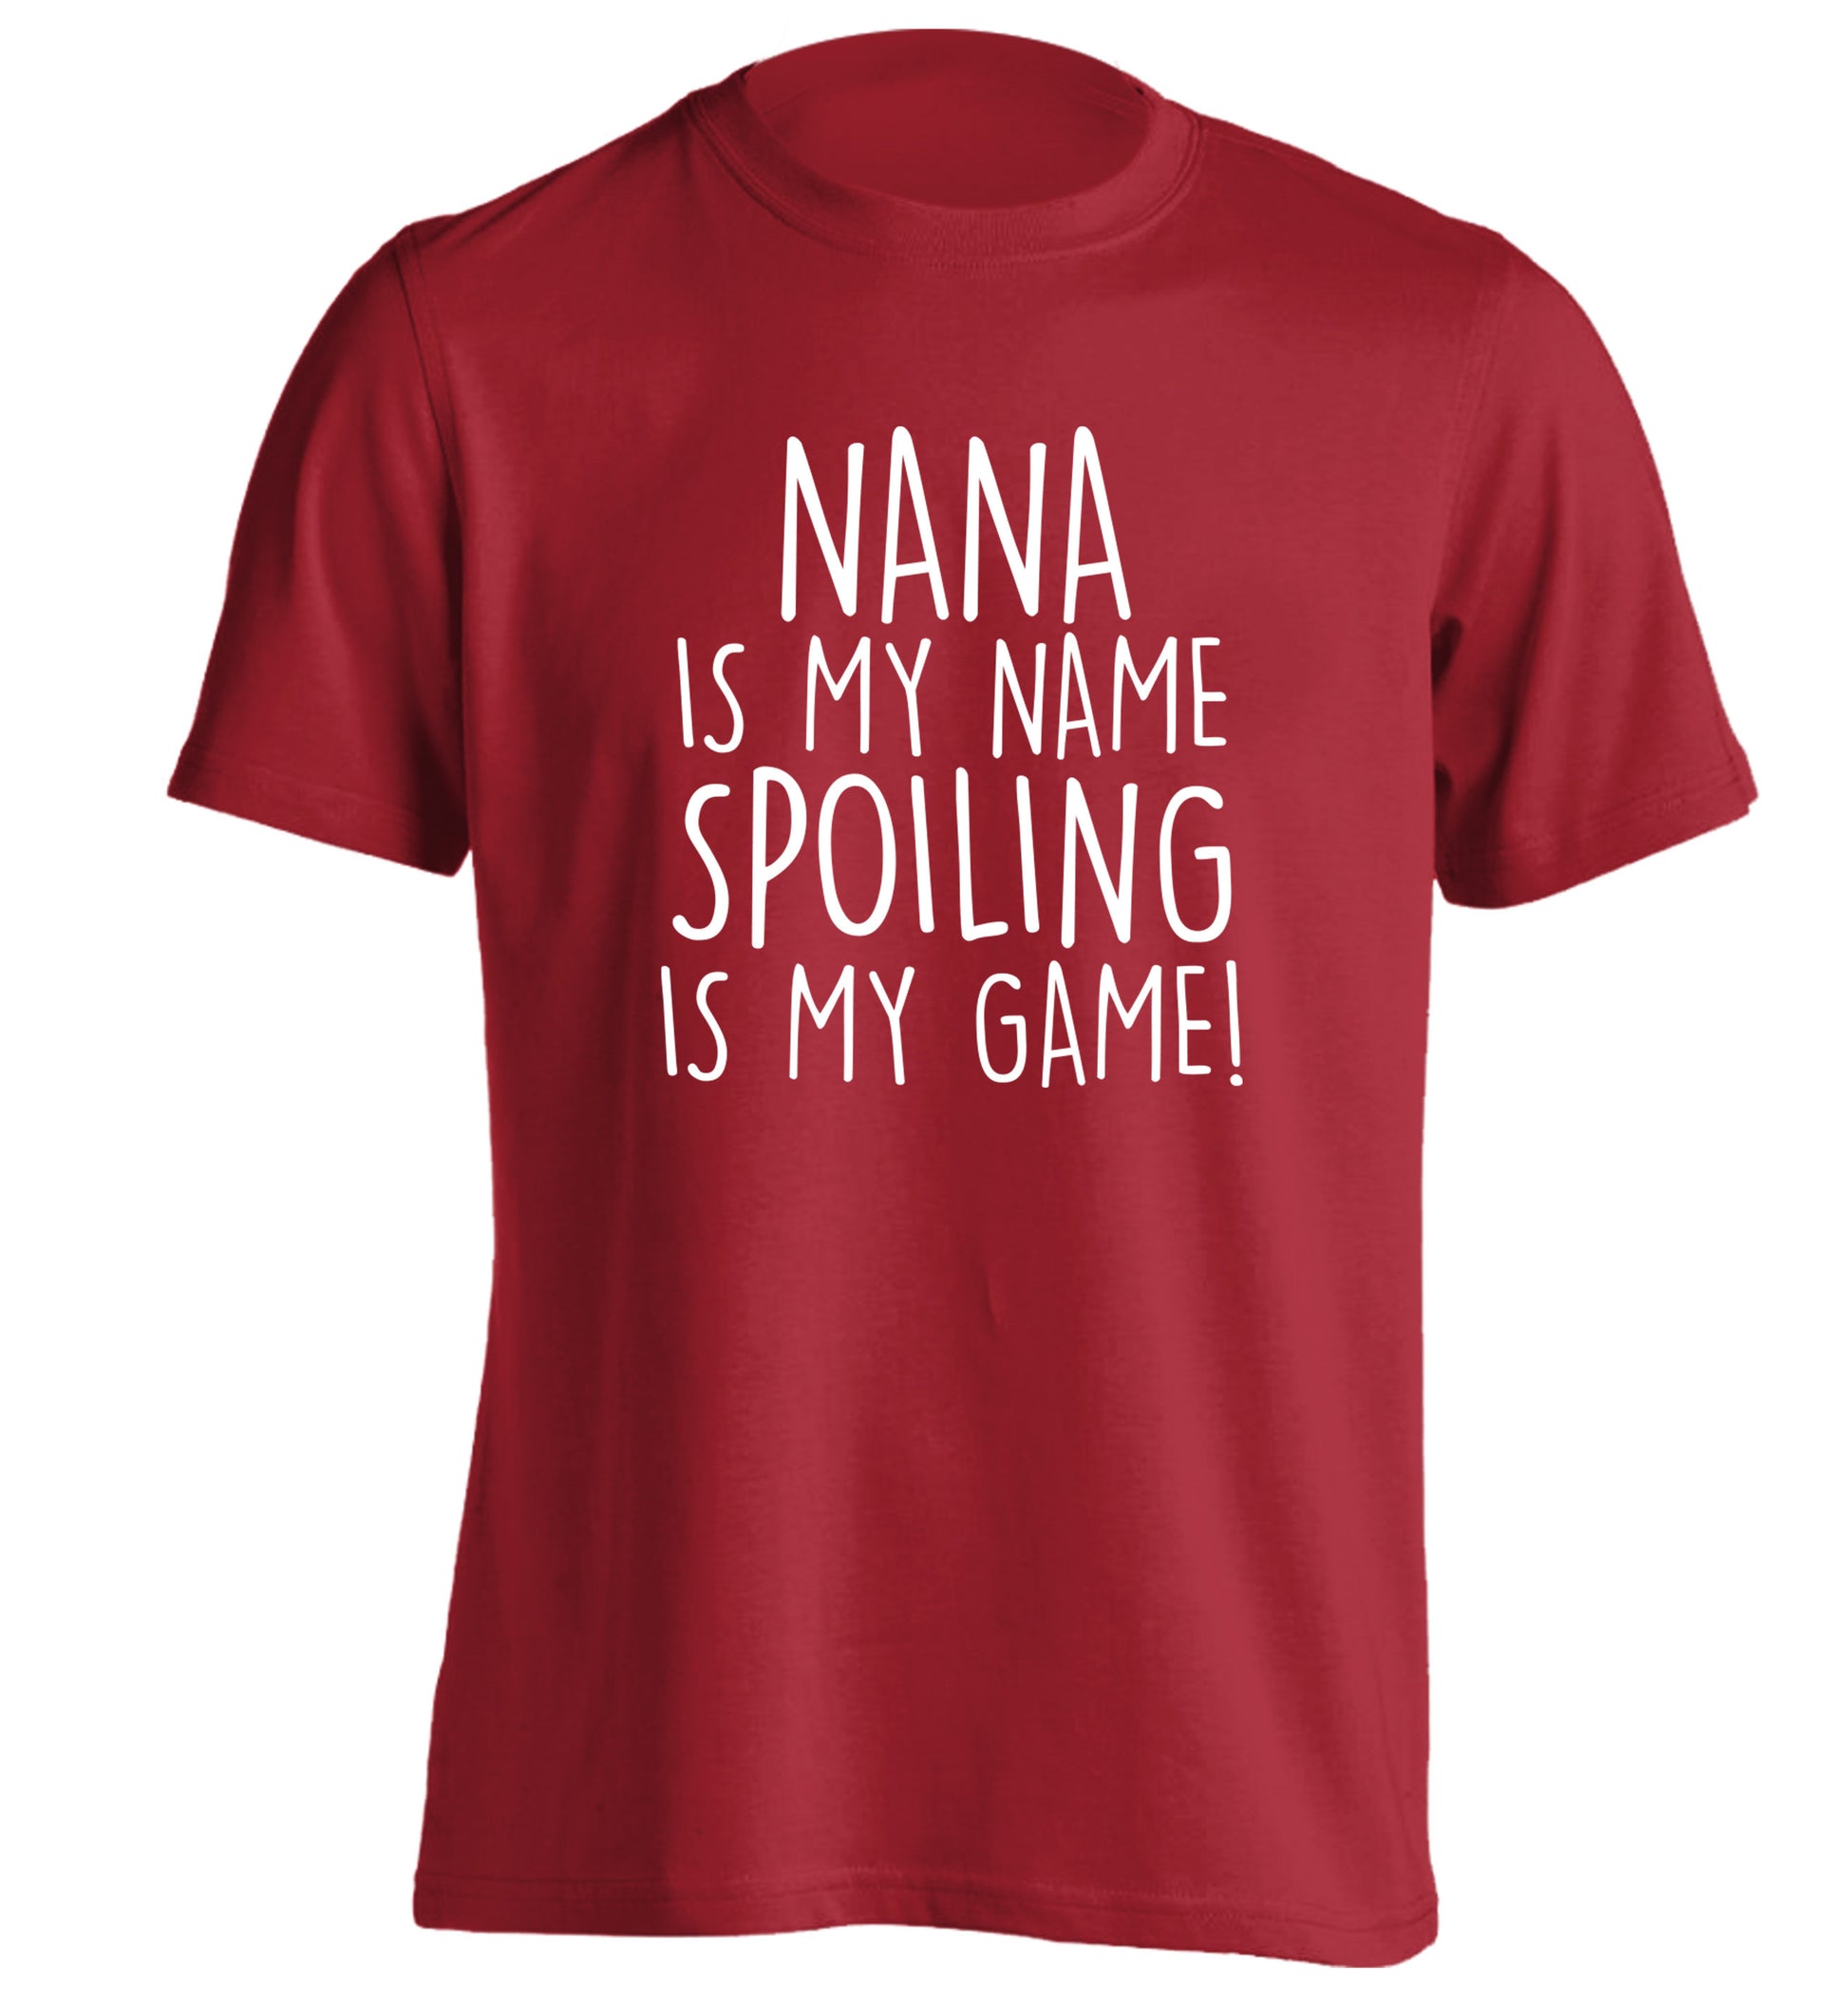 Nana is my name, spoiling is my game adults unisex red Tshirt 2XL